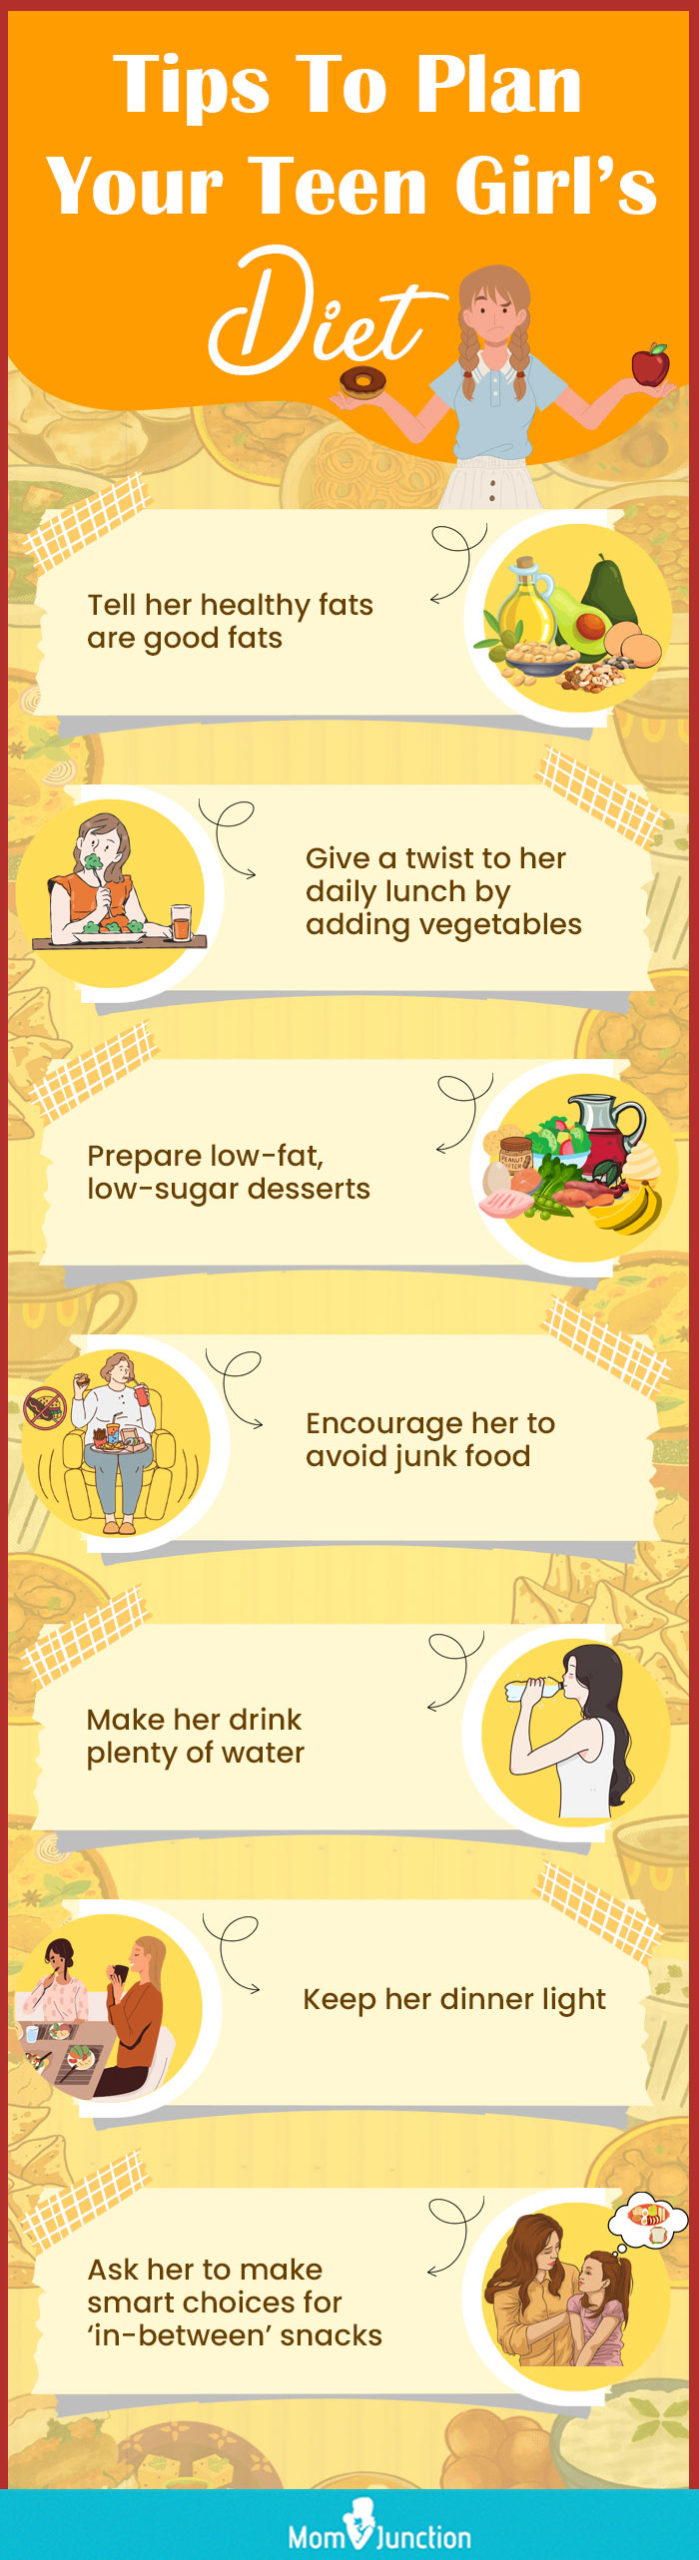 tips to plan your teen girl’s diet (infographic)